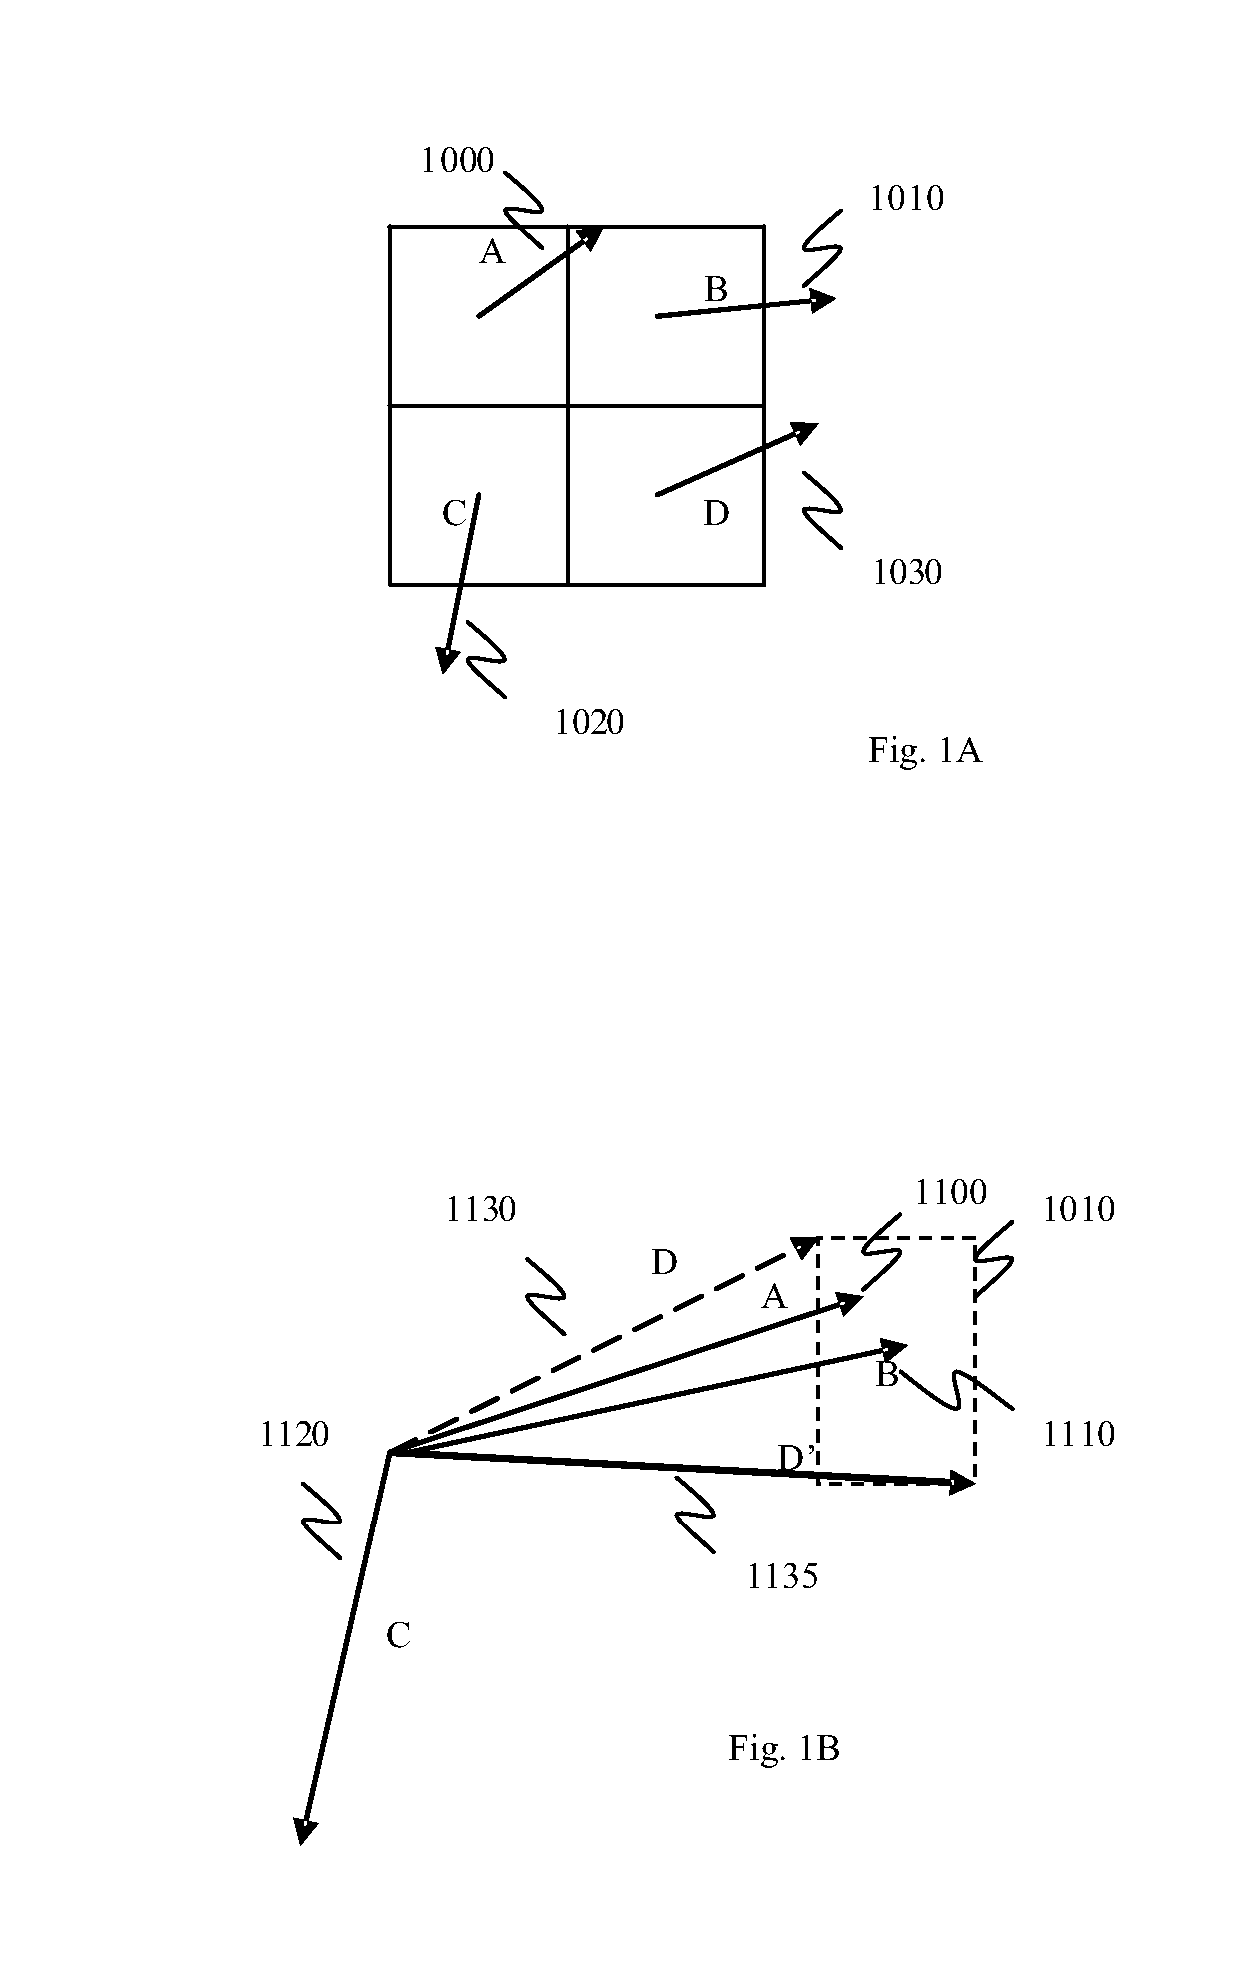 Method and System for Video Encoding and Transcoding